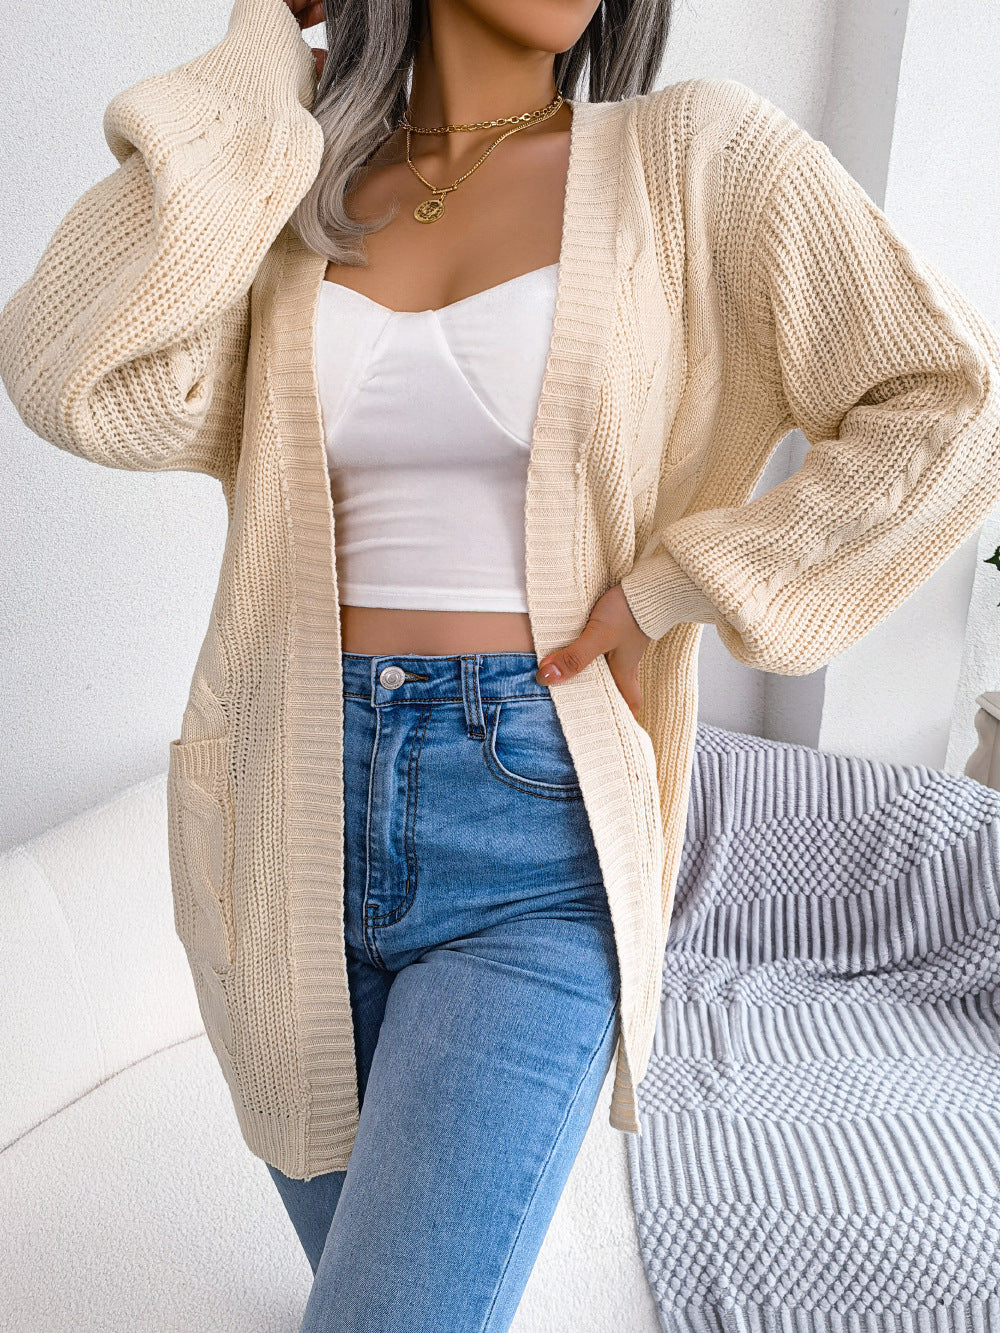 Trendsi Cupid Beauty Supplies Beige / S Woman Cardigan Cable-Knit Open Front Pocketed Cardigan